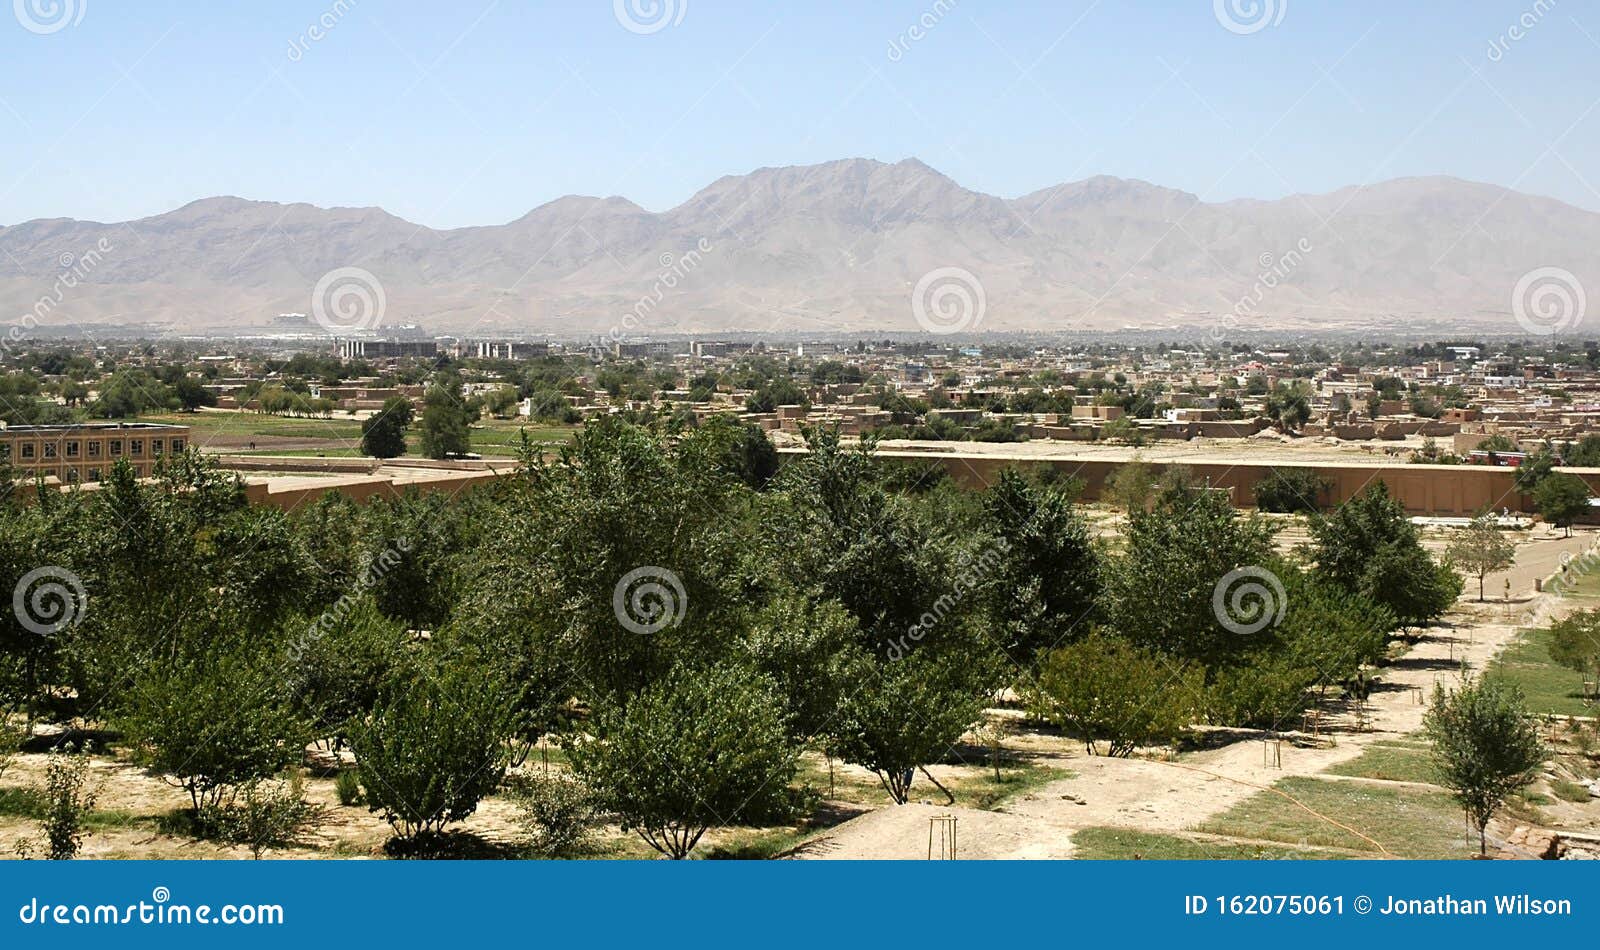 View Of Kabul Afghanistan Taken From The Gardens Of Babur During